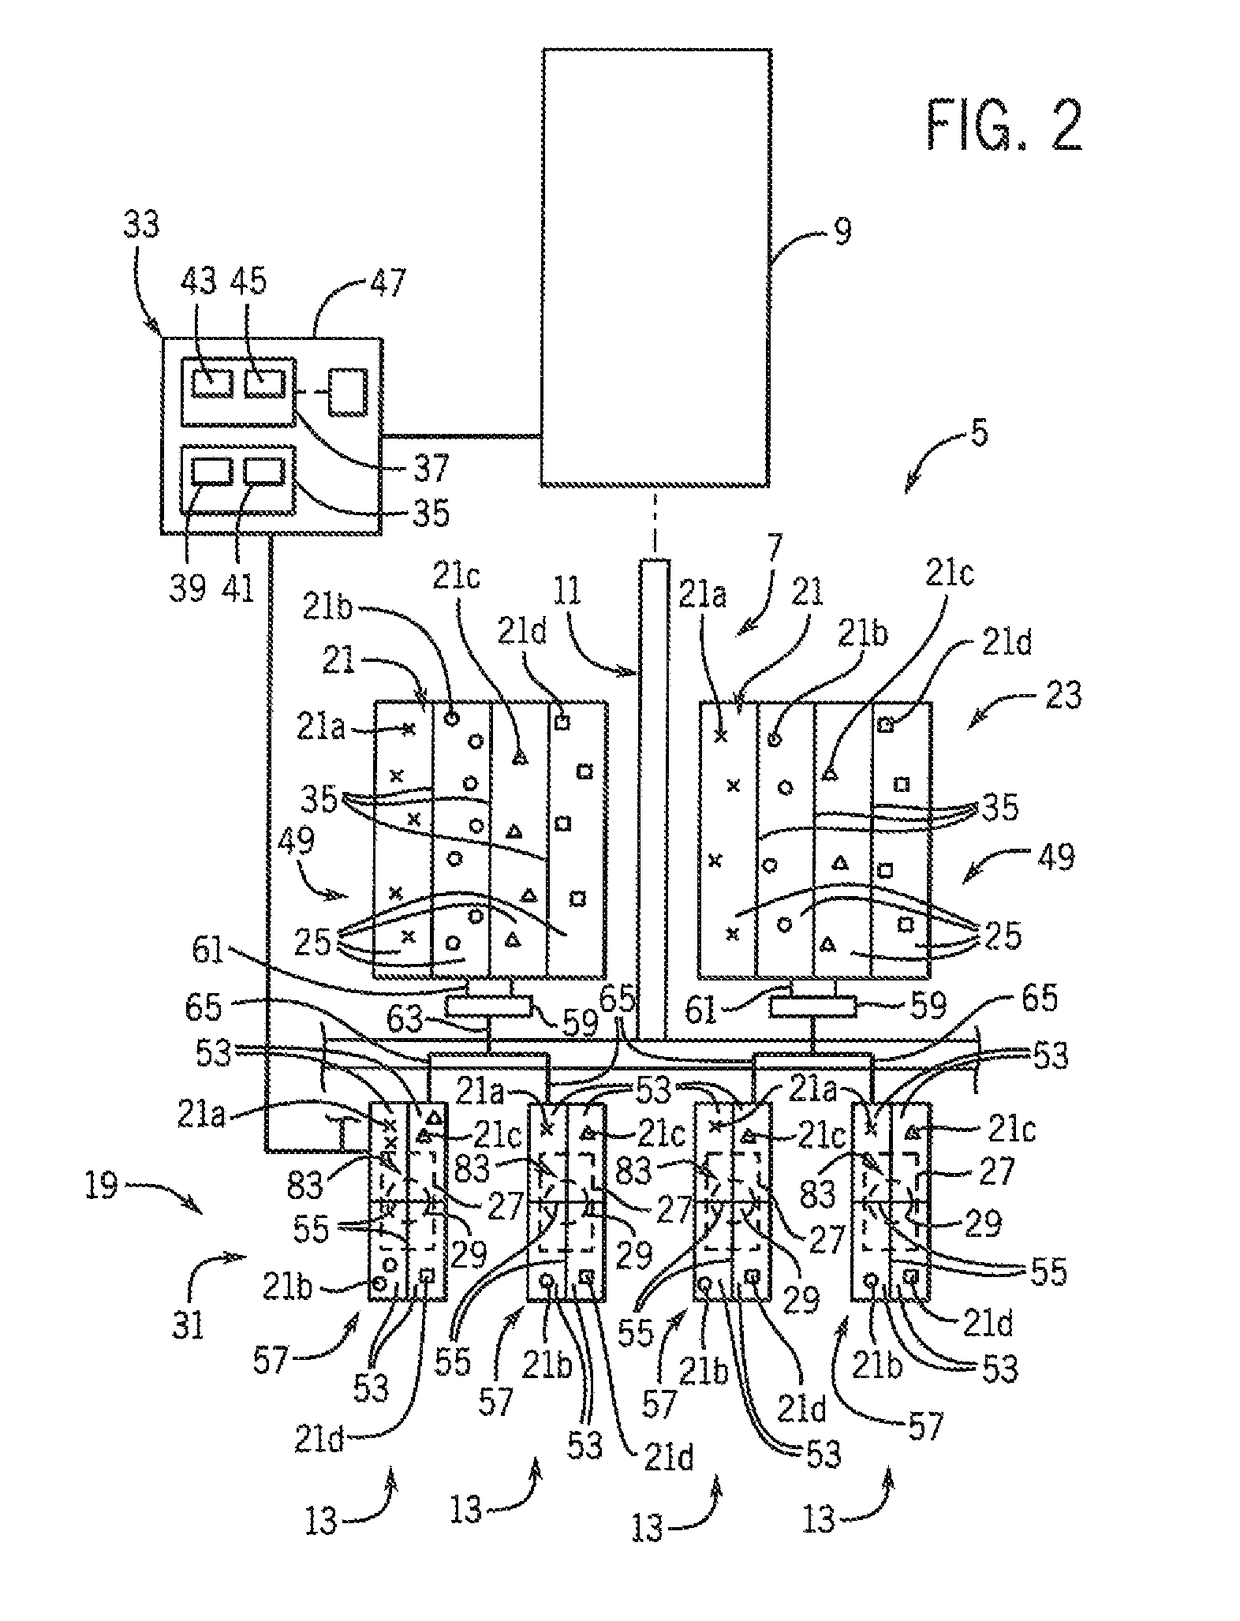 Multiple seed-type planter with on-row selector assembly